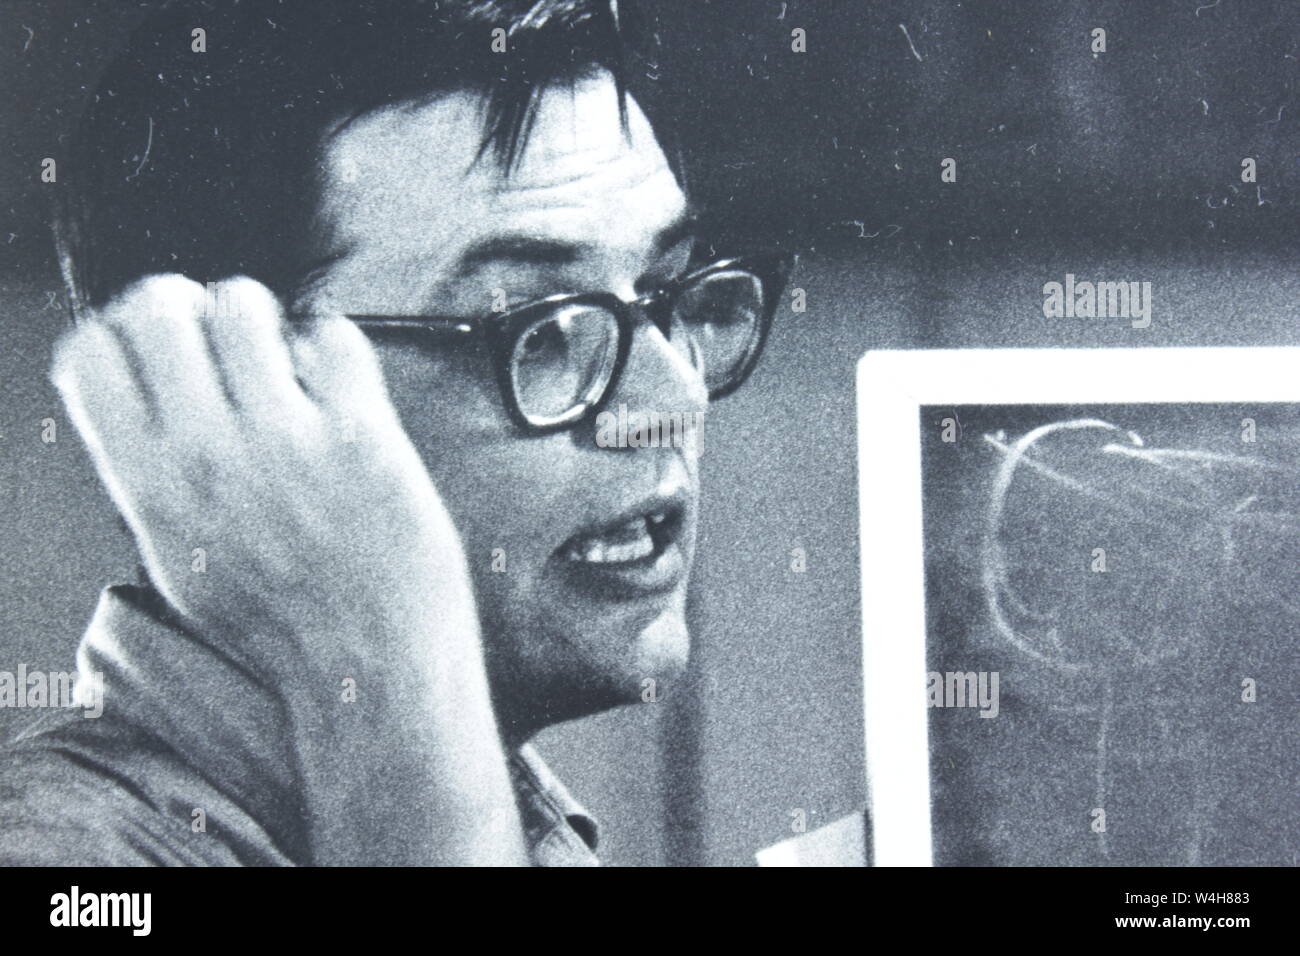 Fine black and white art photography of a bewildered scientist from the 1960s. Stock Photo